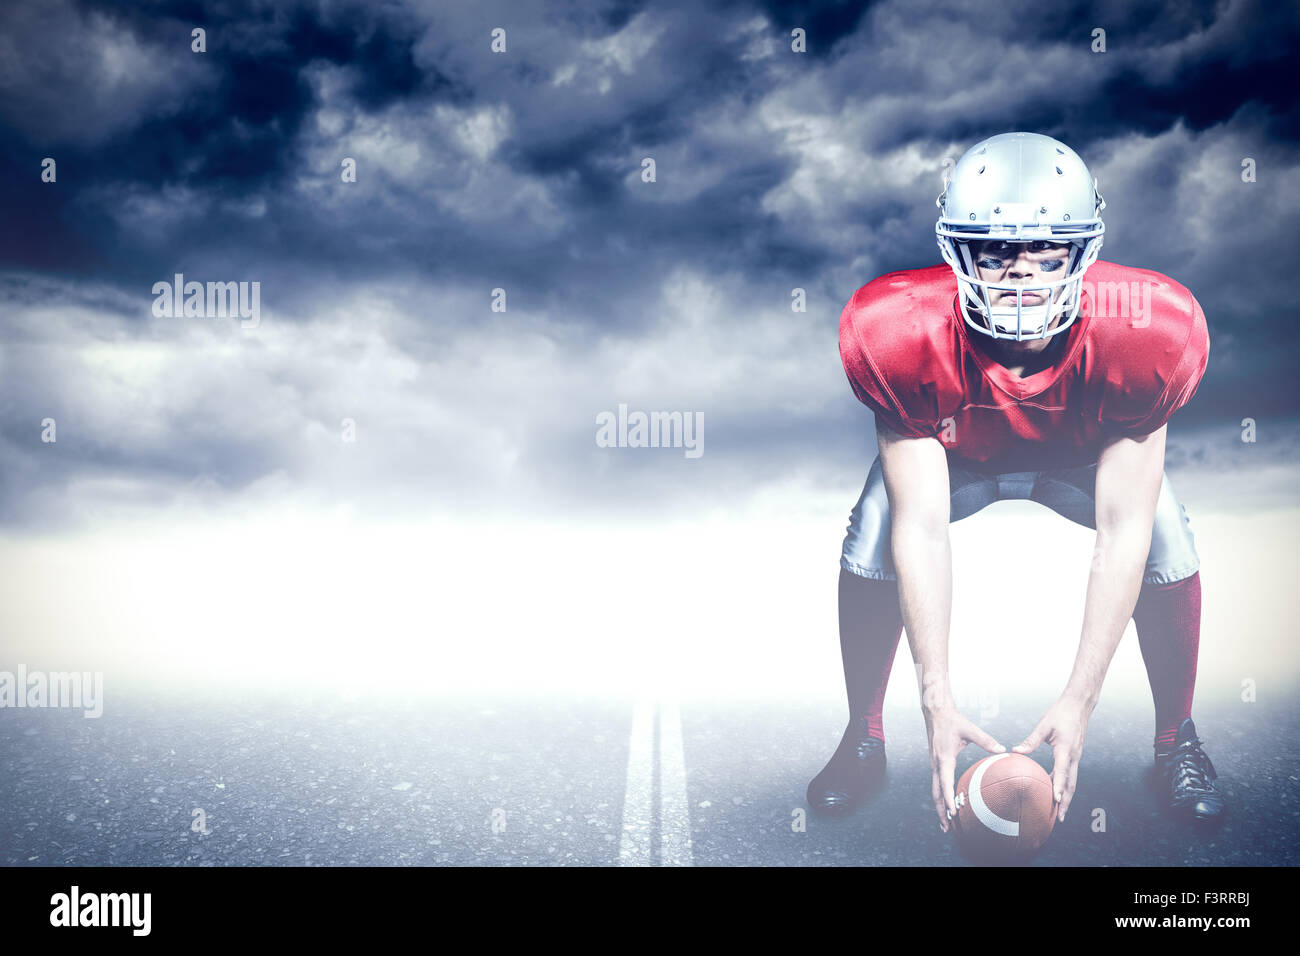 Composite image of american football player bending while holding ball Stock Photo